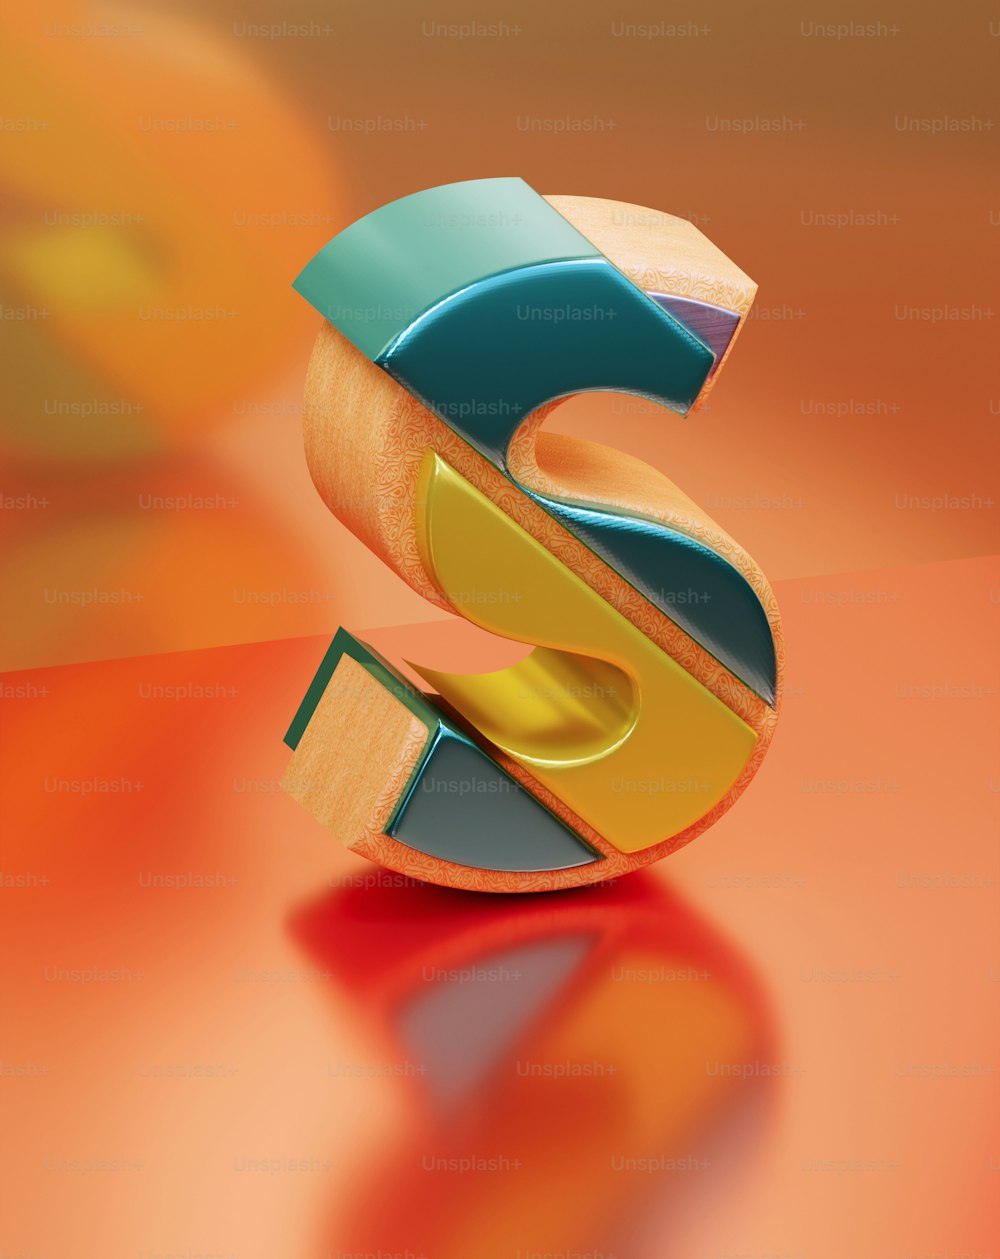 a 3d image of the letter s on a table